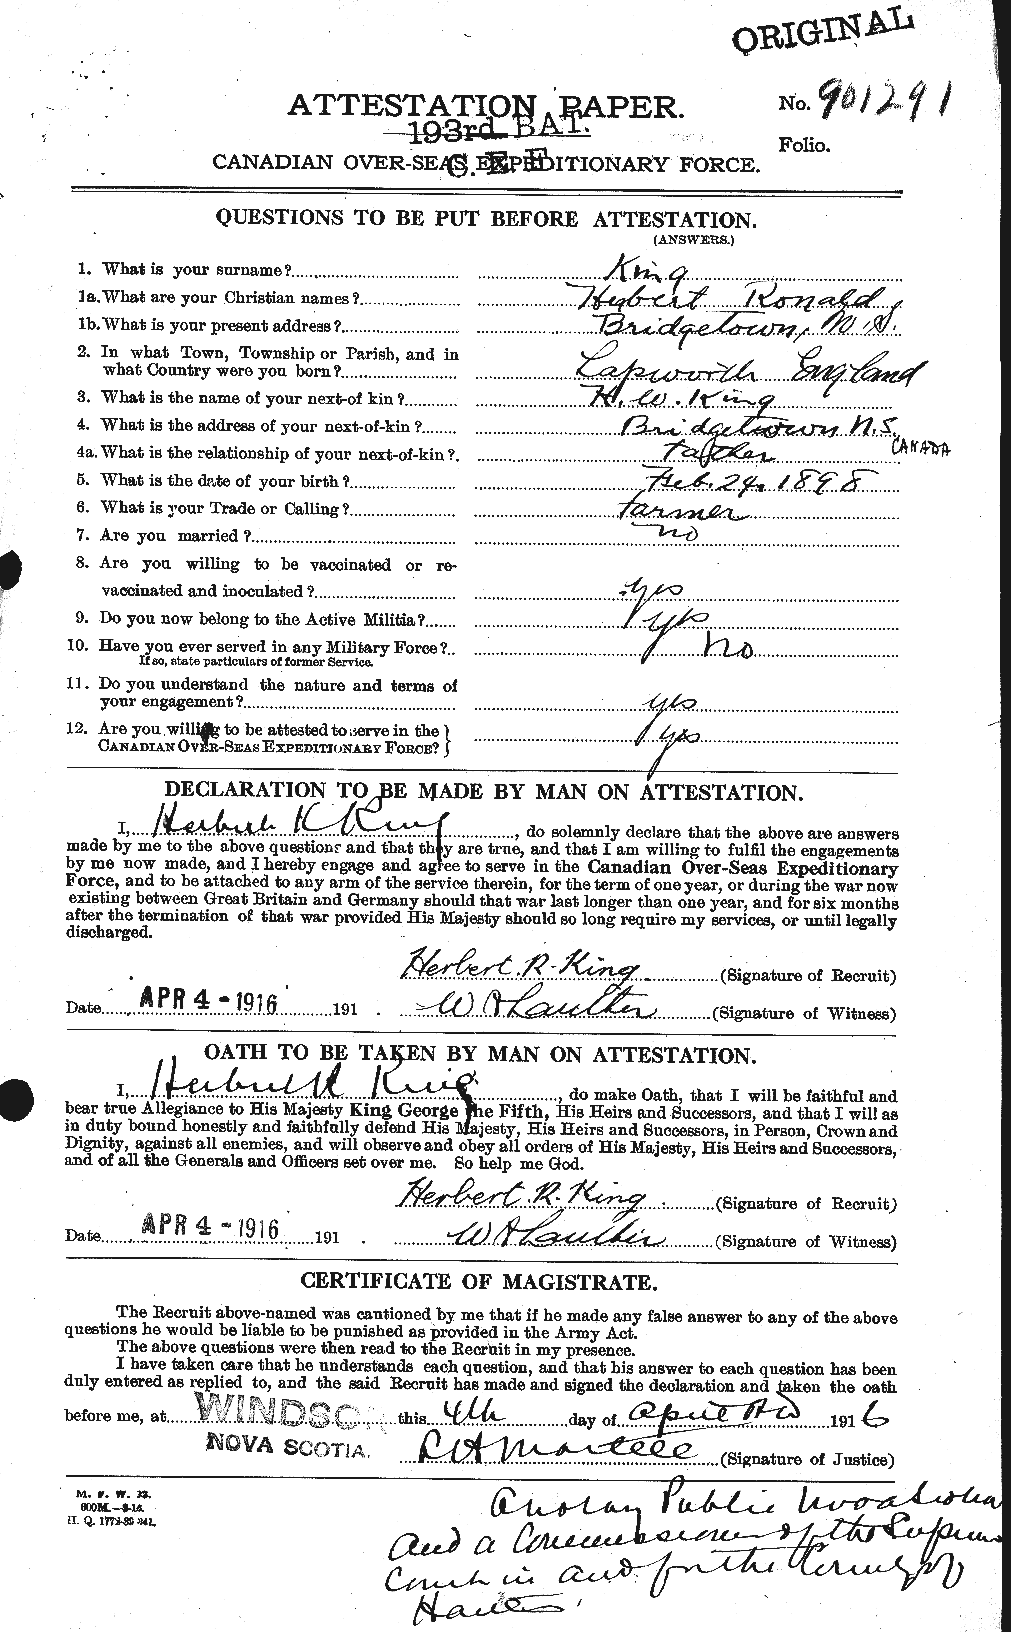 Personnel Records of the First World War - CEF 434501a